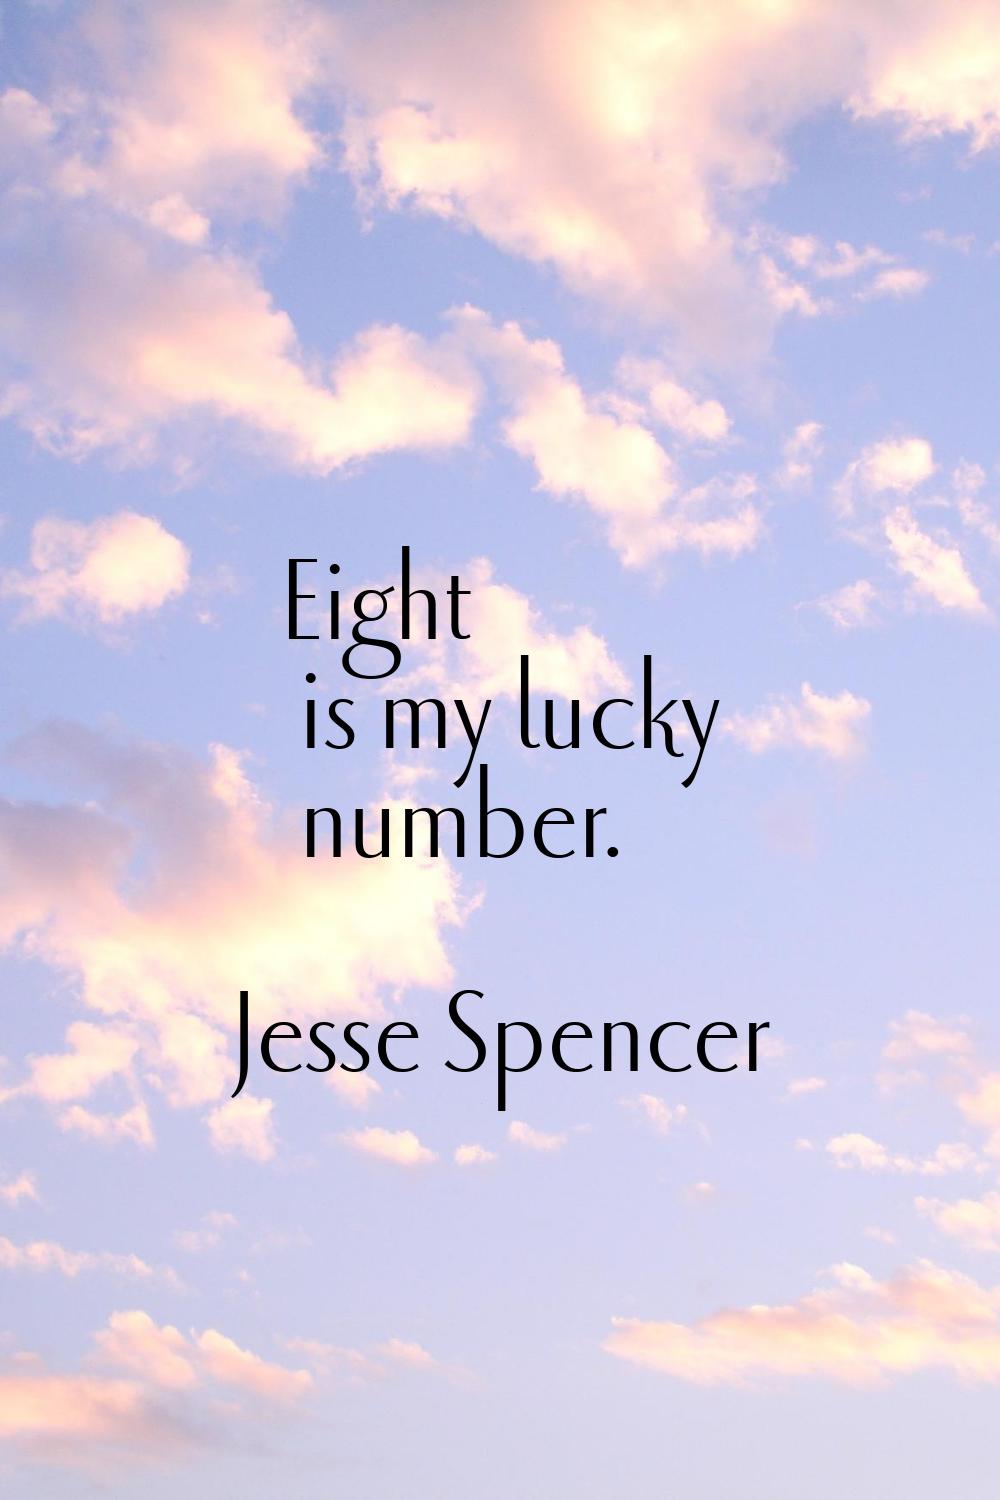 Eight is my lucky number.